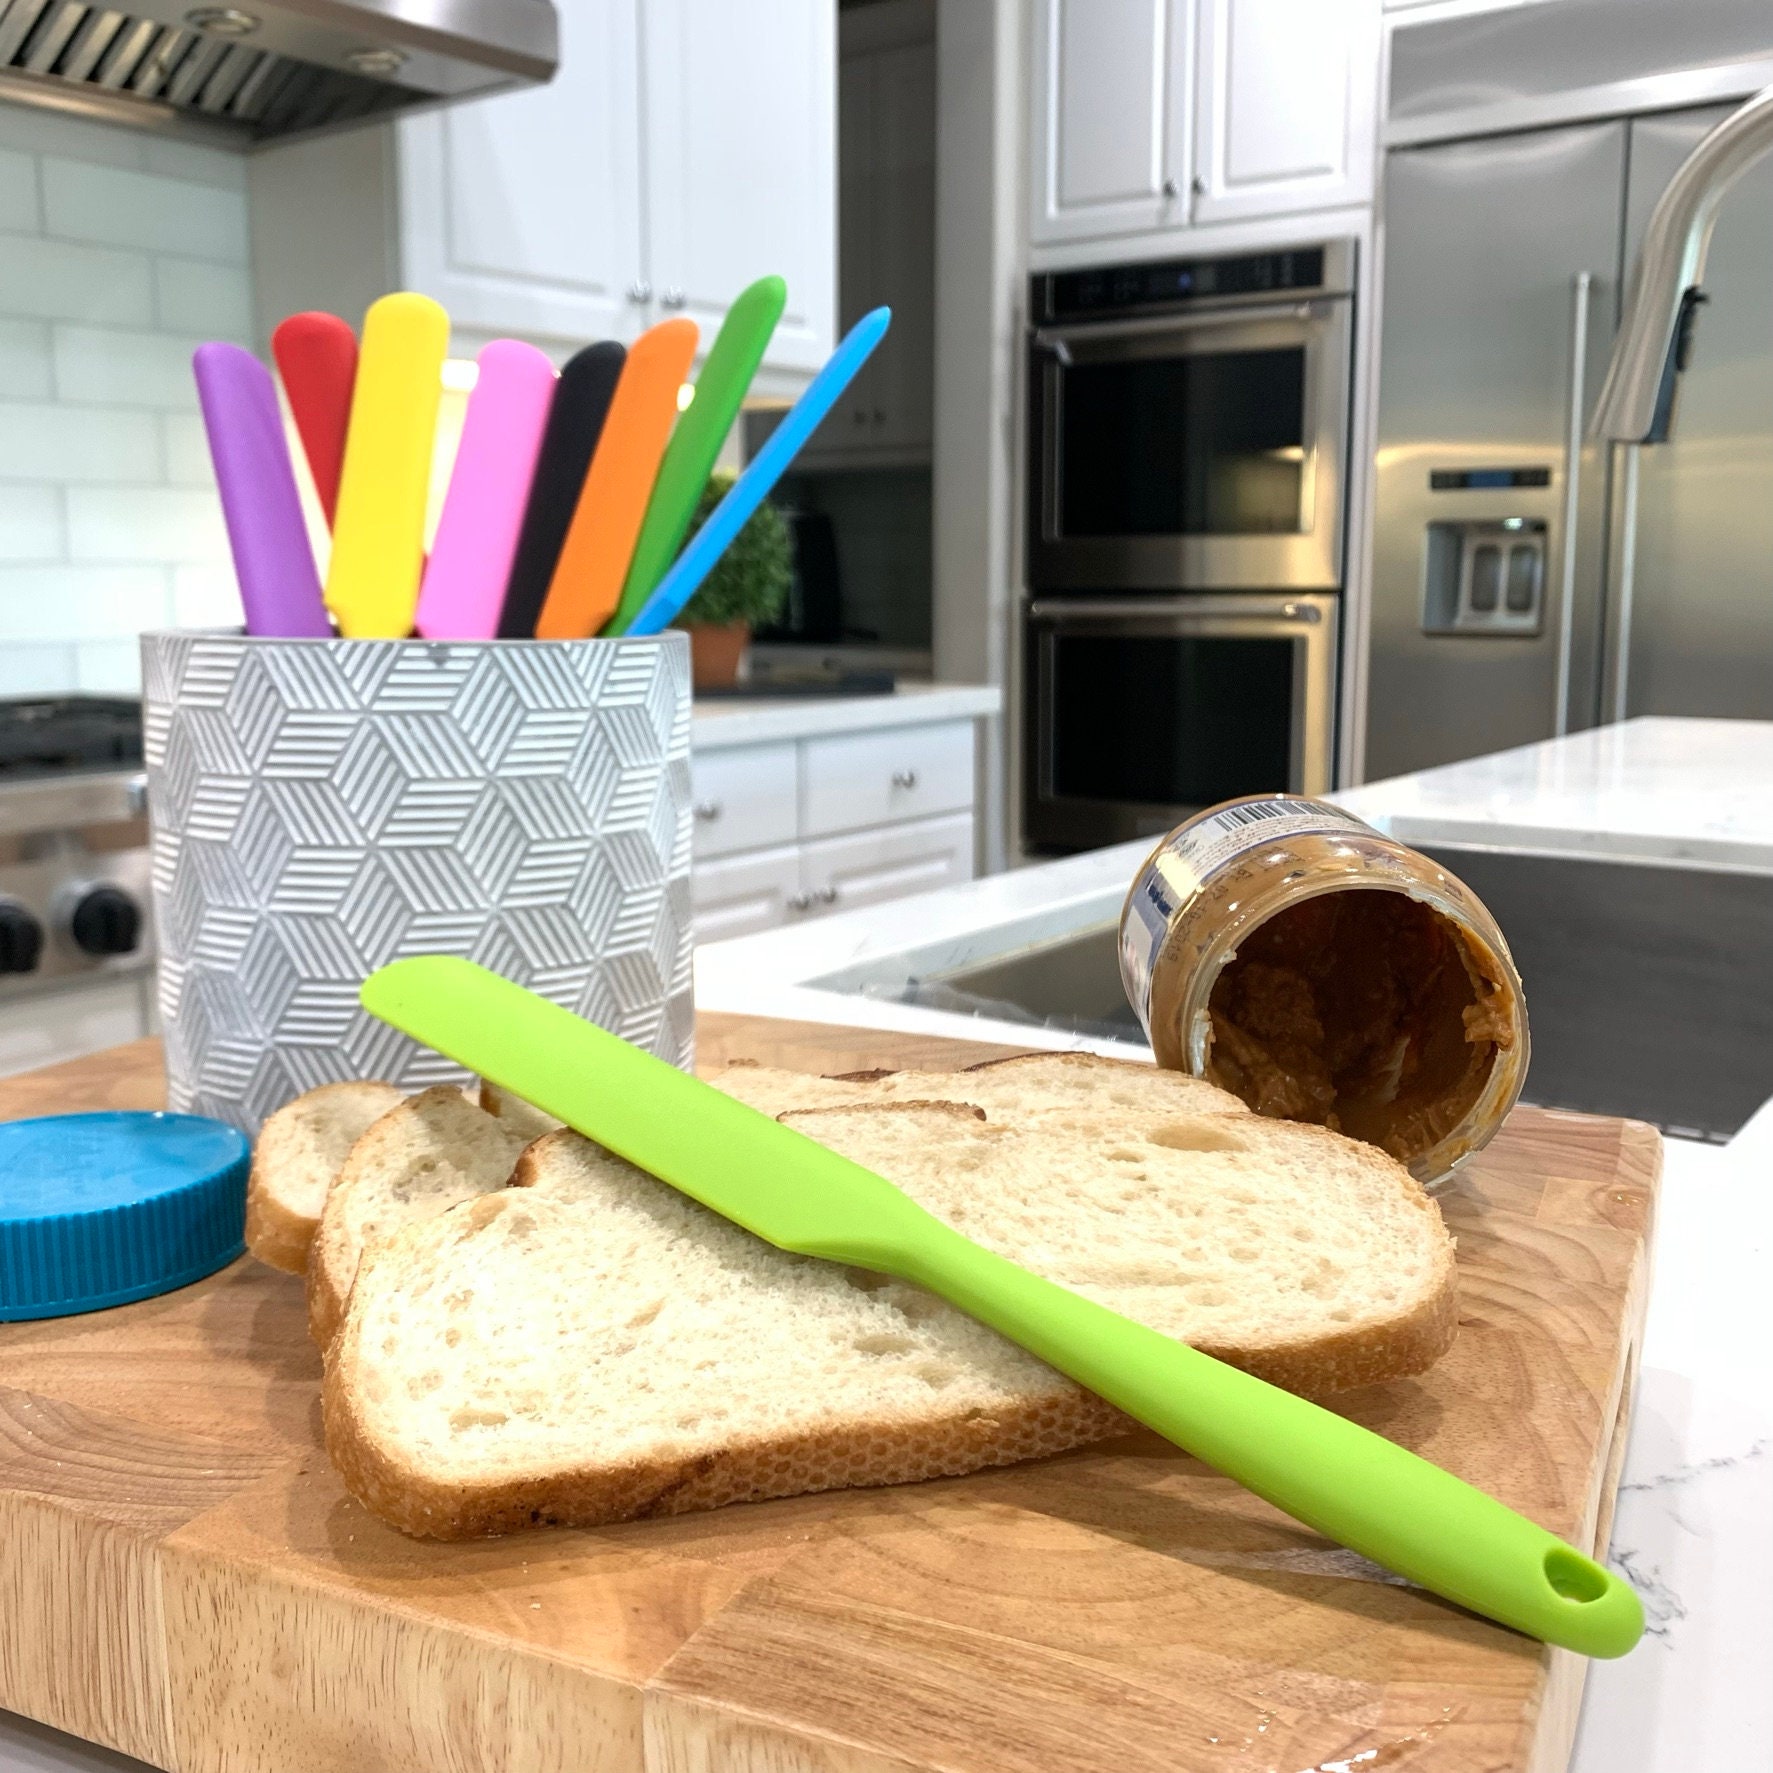 MOJOTORY Jar Spatula, Silicone Jar Scraper with Long Handle, Jam Spreader for Peanut Butter, Kitchen Spatula for Baking and Cake Icing